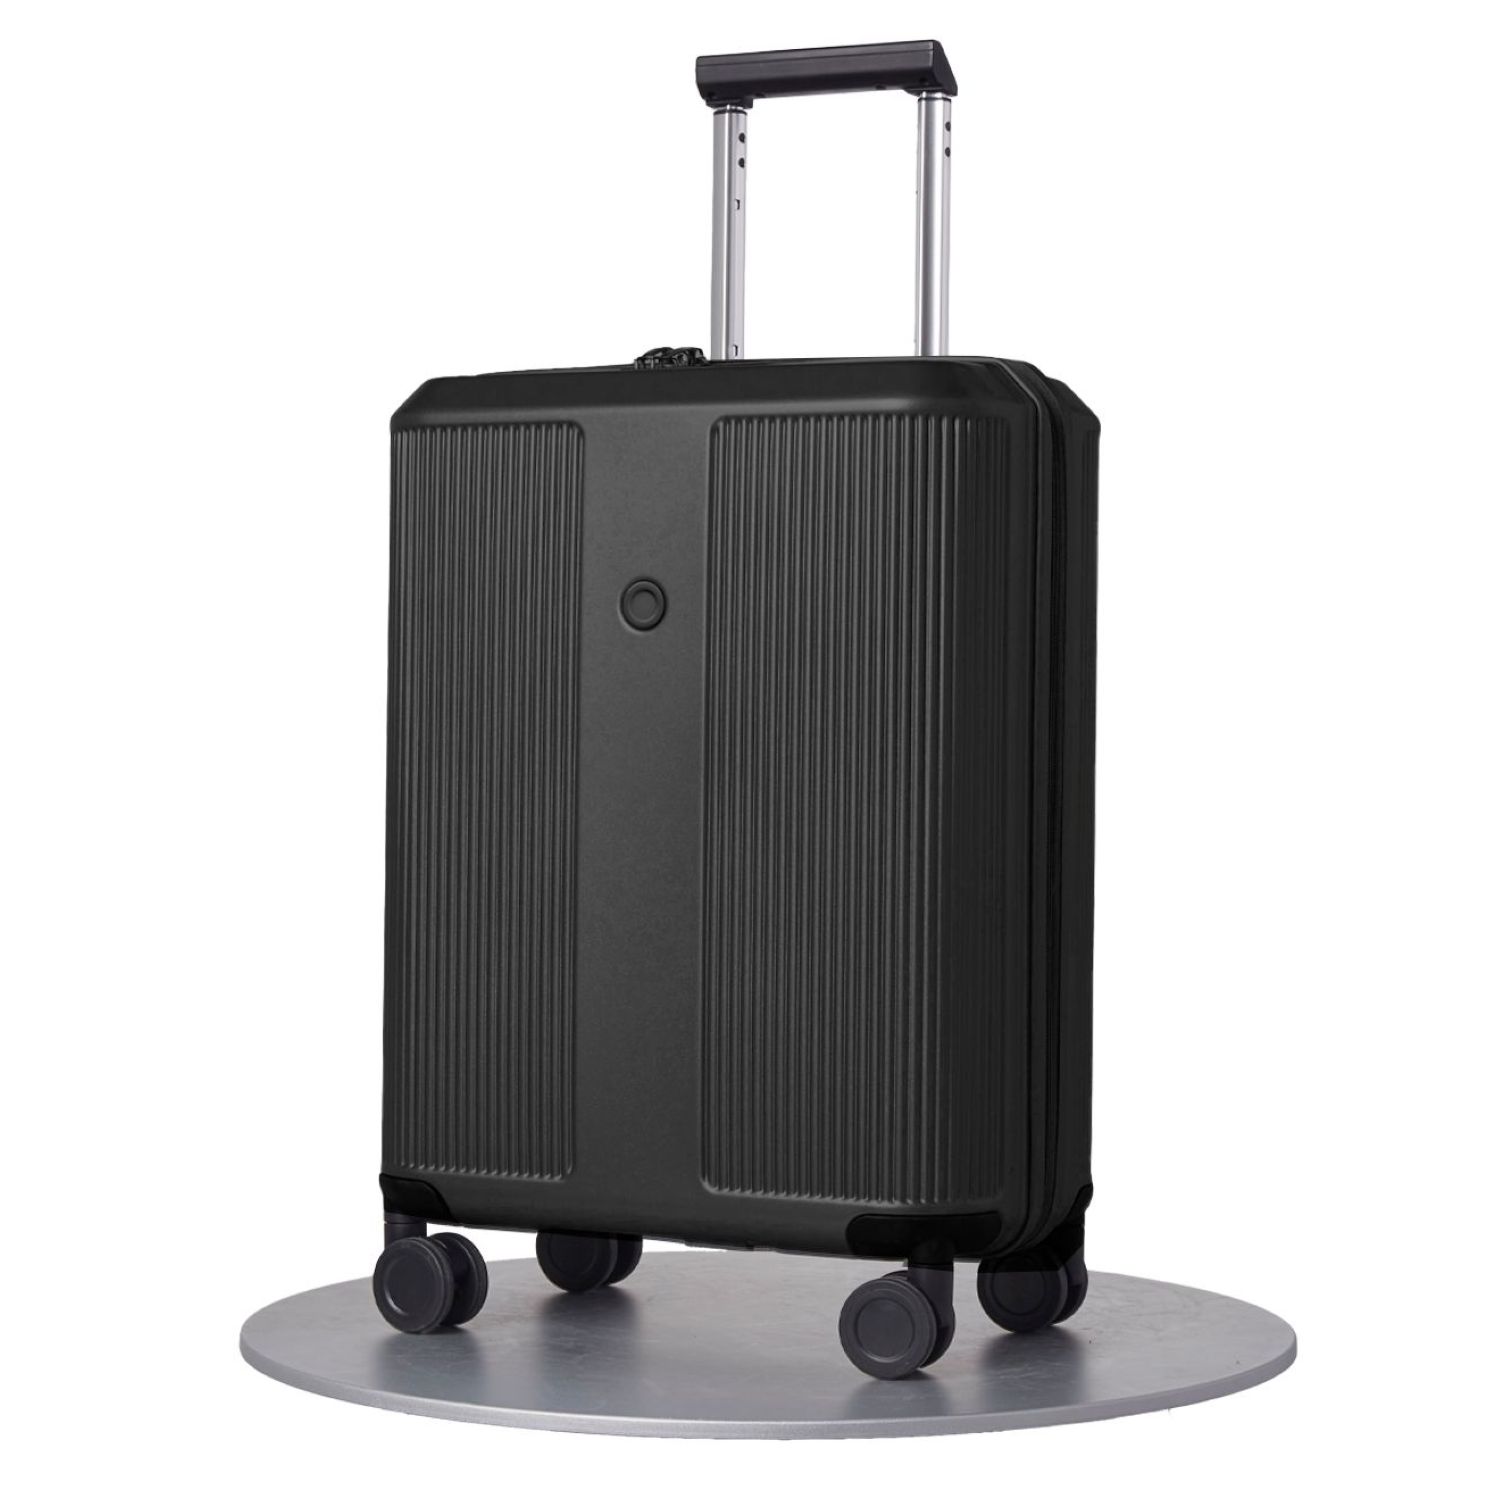 Amazon.co.jp: Echo Luck Celestra Suitcase, 2.5 gal (72 L), 18.5 inches (47  cm), 9.7 lbs (4.4, blue : Clothing, Shoes & Jewelry